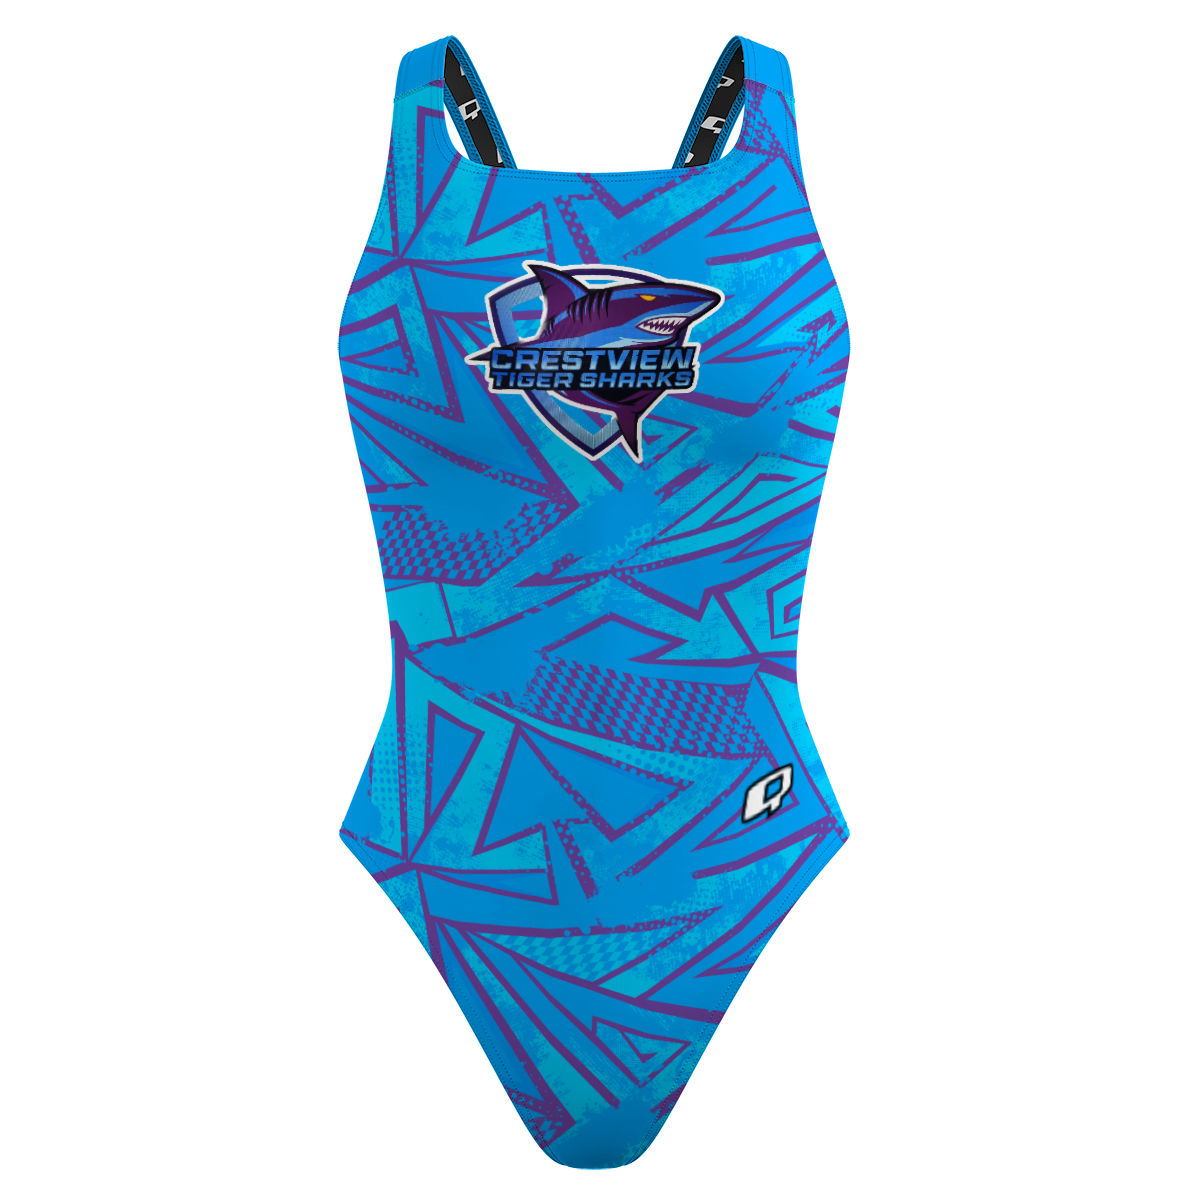 Crestview Tiger Sharks 2 - Classic Strap Swimsuit